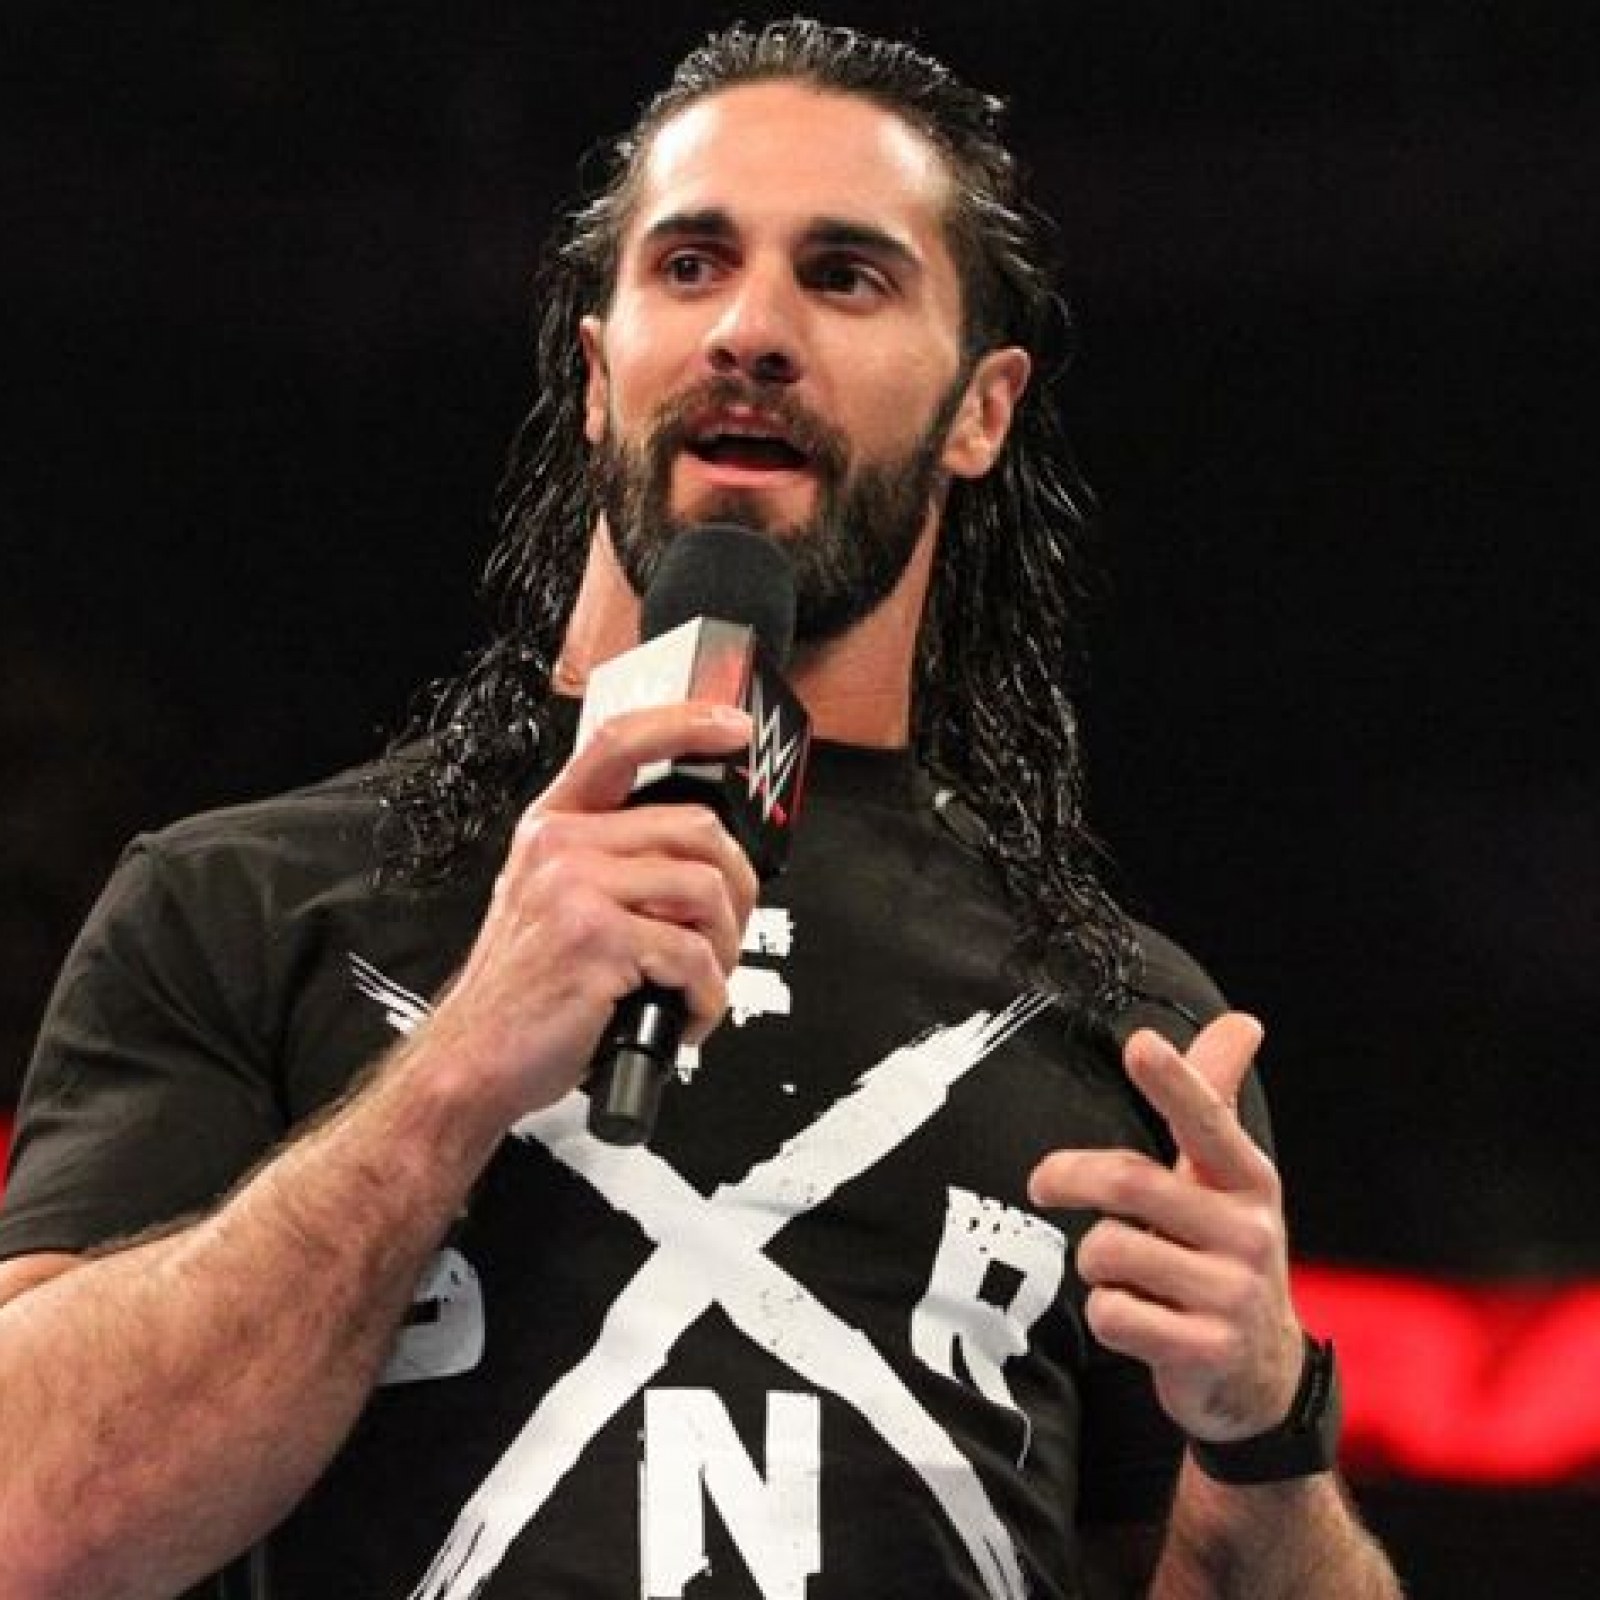 Seth Rollins Responds to Jon Moxley's Comments and Defends WWE